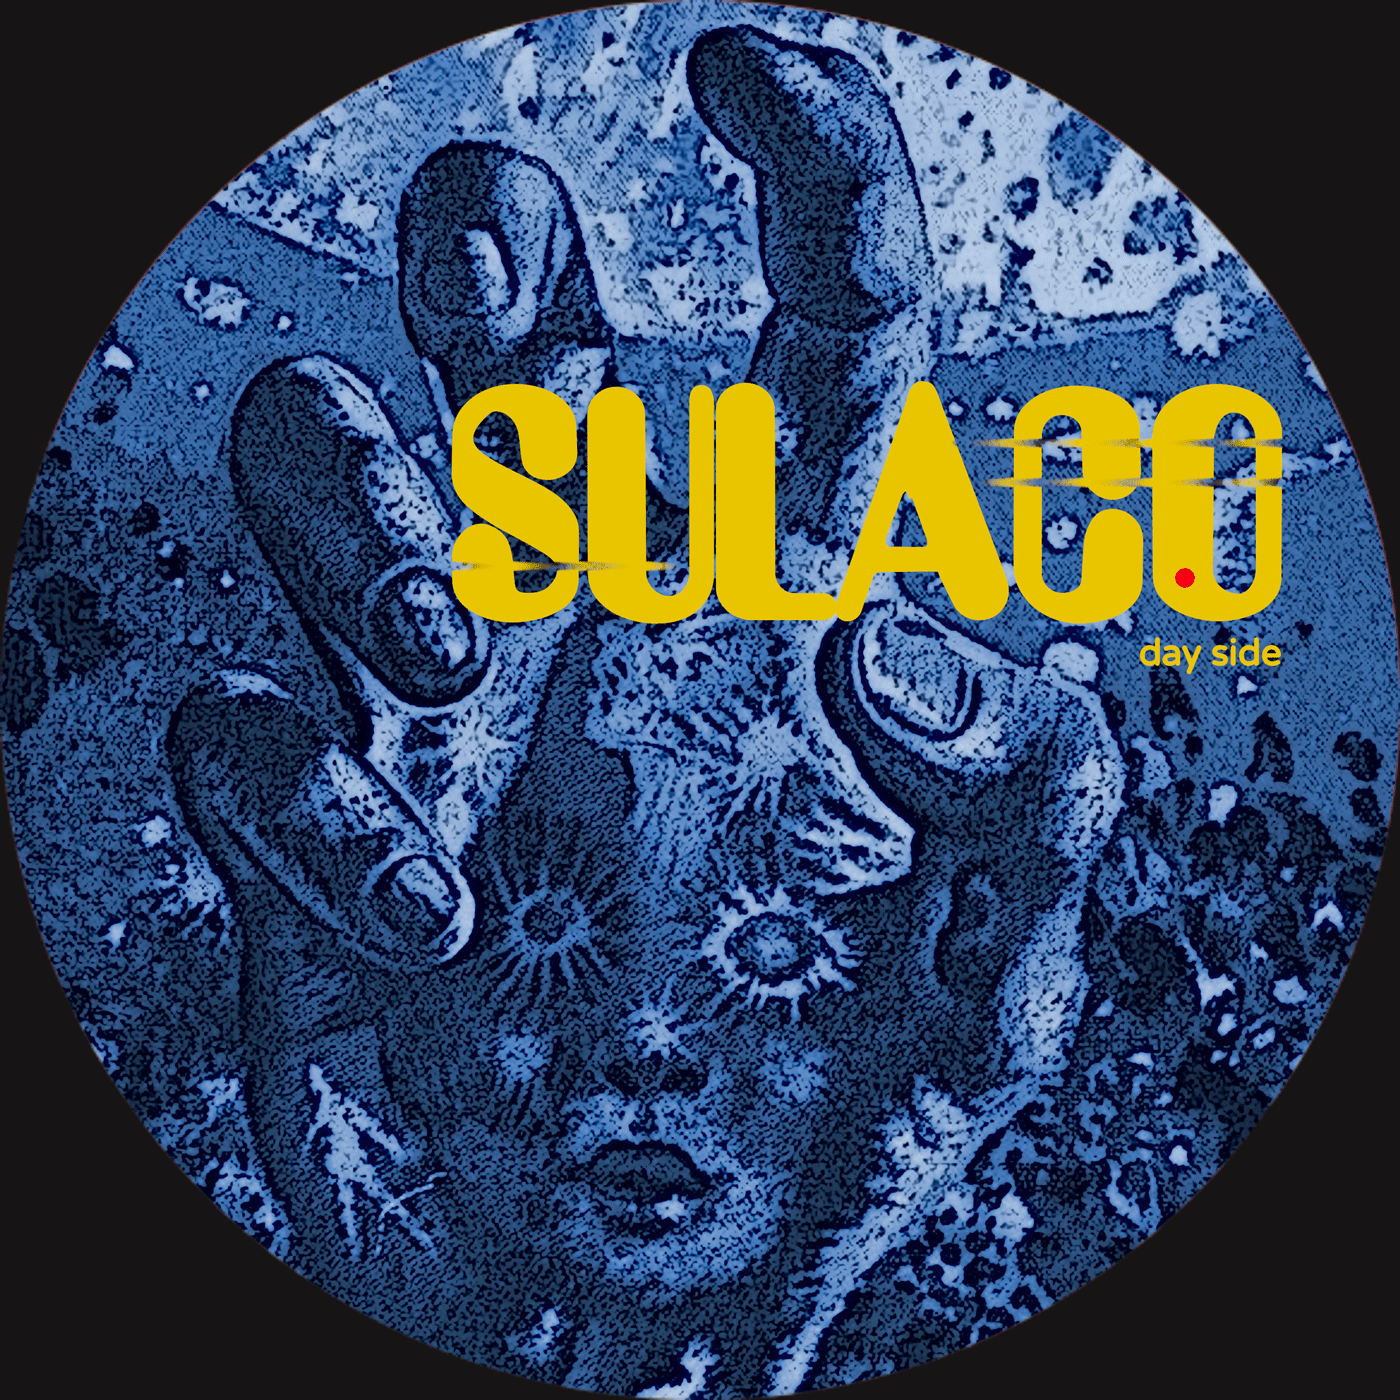 Sulaco's inaugural release sees the return of James Johnston with "Deep Side of the Day"